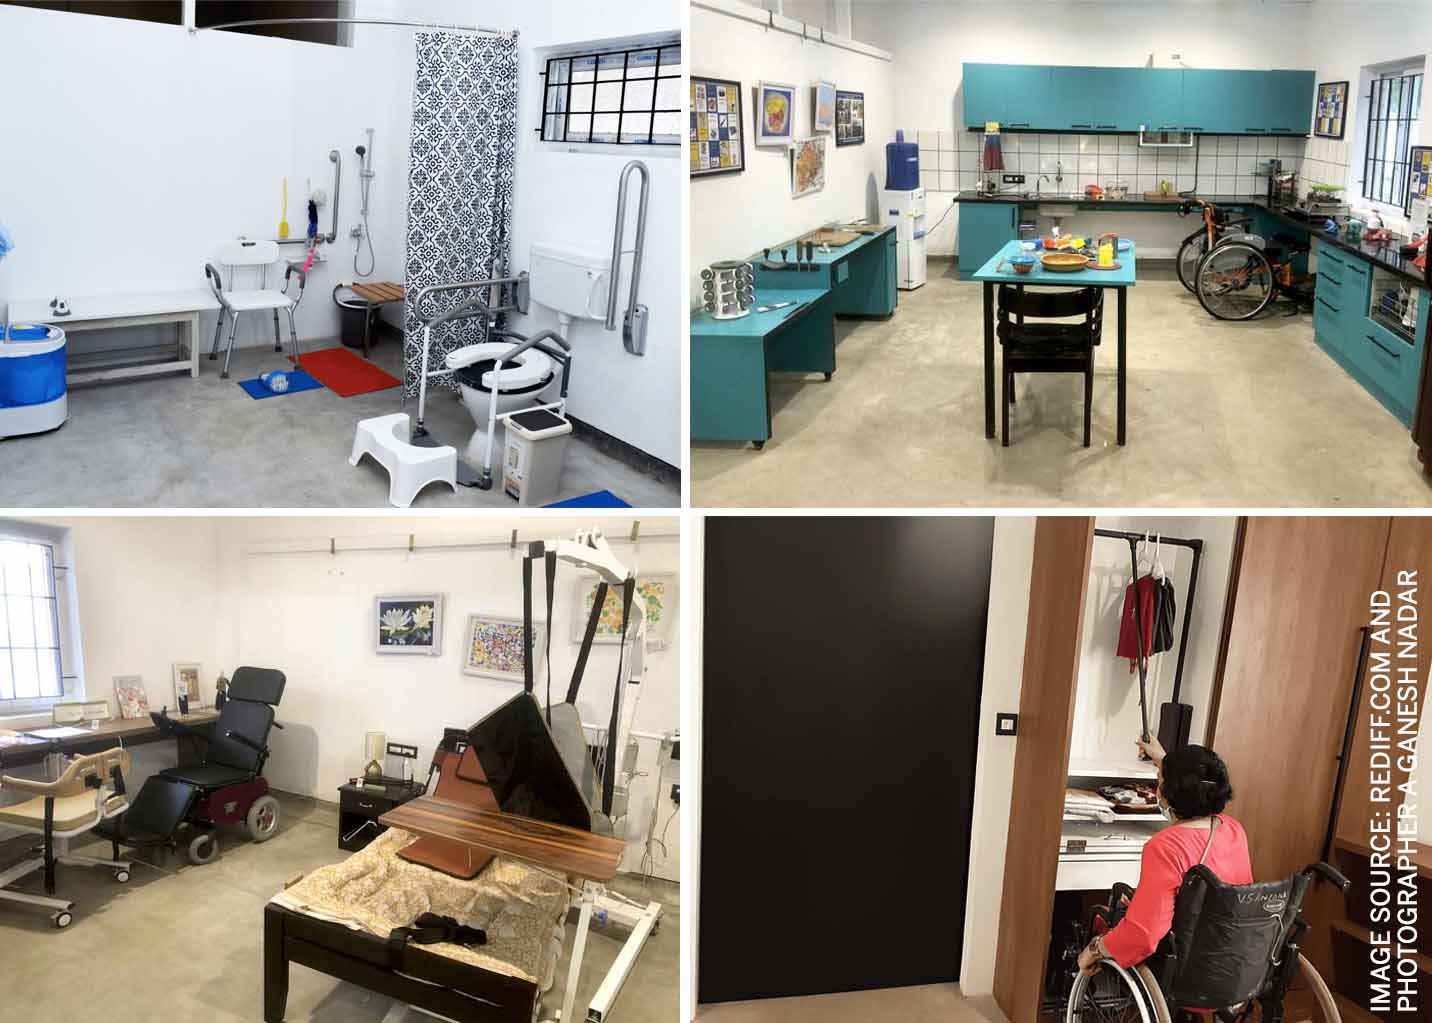 approaches-to-accessible-living-for-persons-with-disabilities-the-foundation-for-inclusive-cities-glimpses-model-home-museum-possibilities-chennai-accessible-rest-room-kitchen-bedroom-space-wardrobe